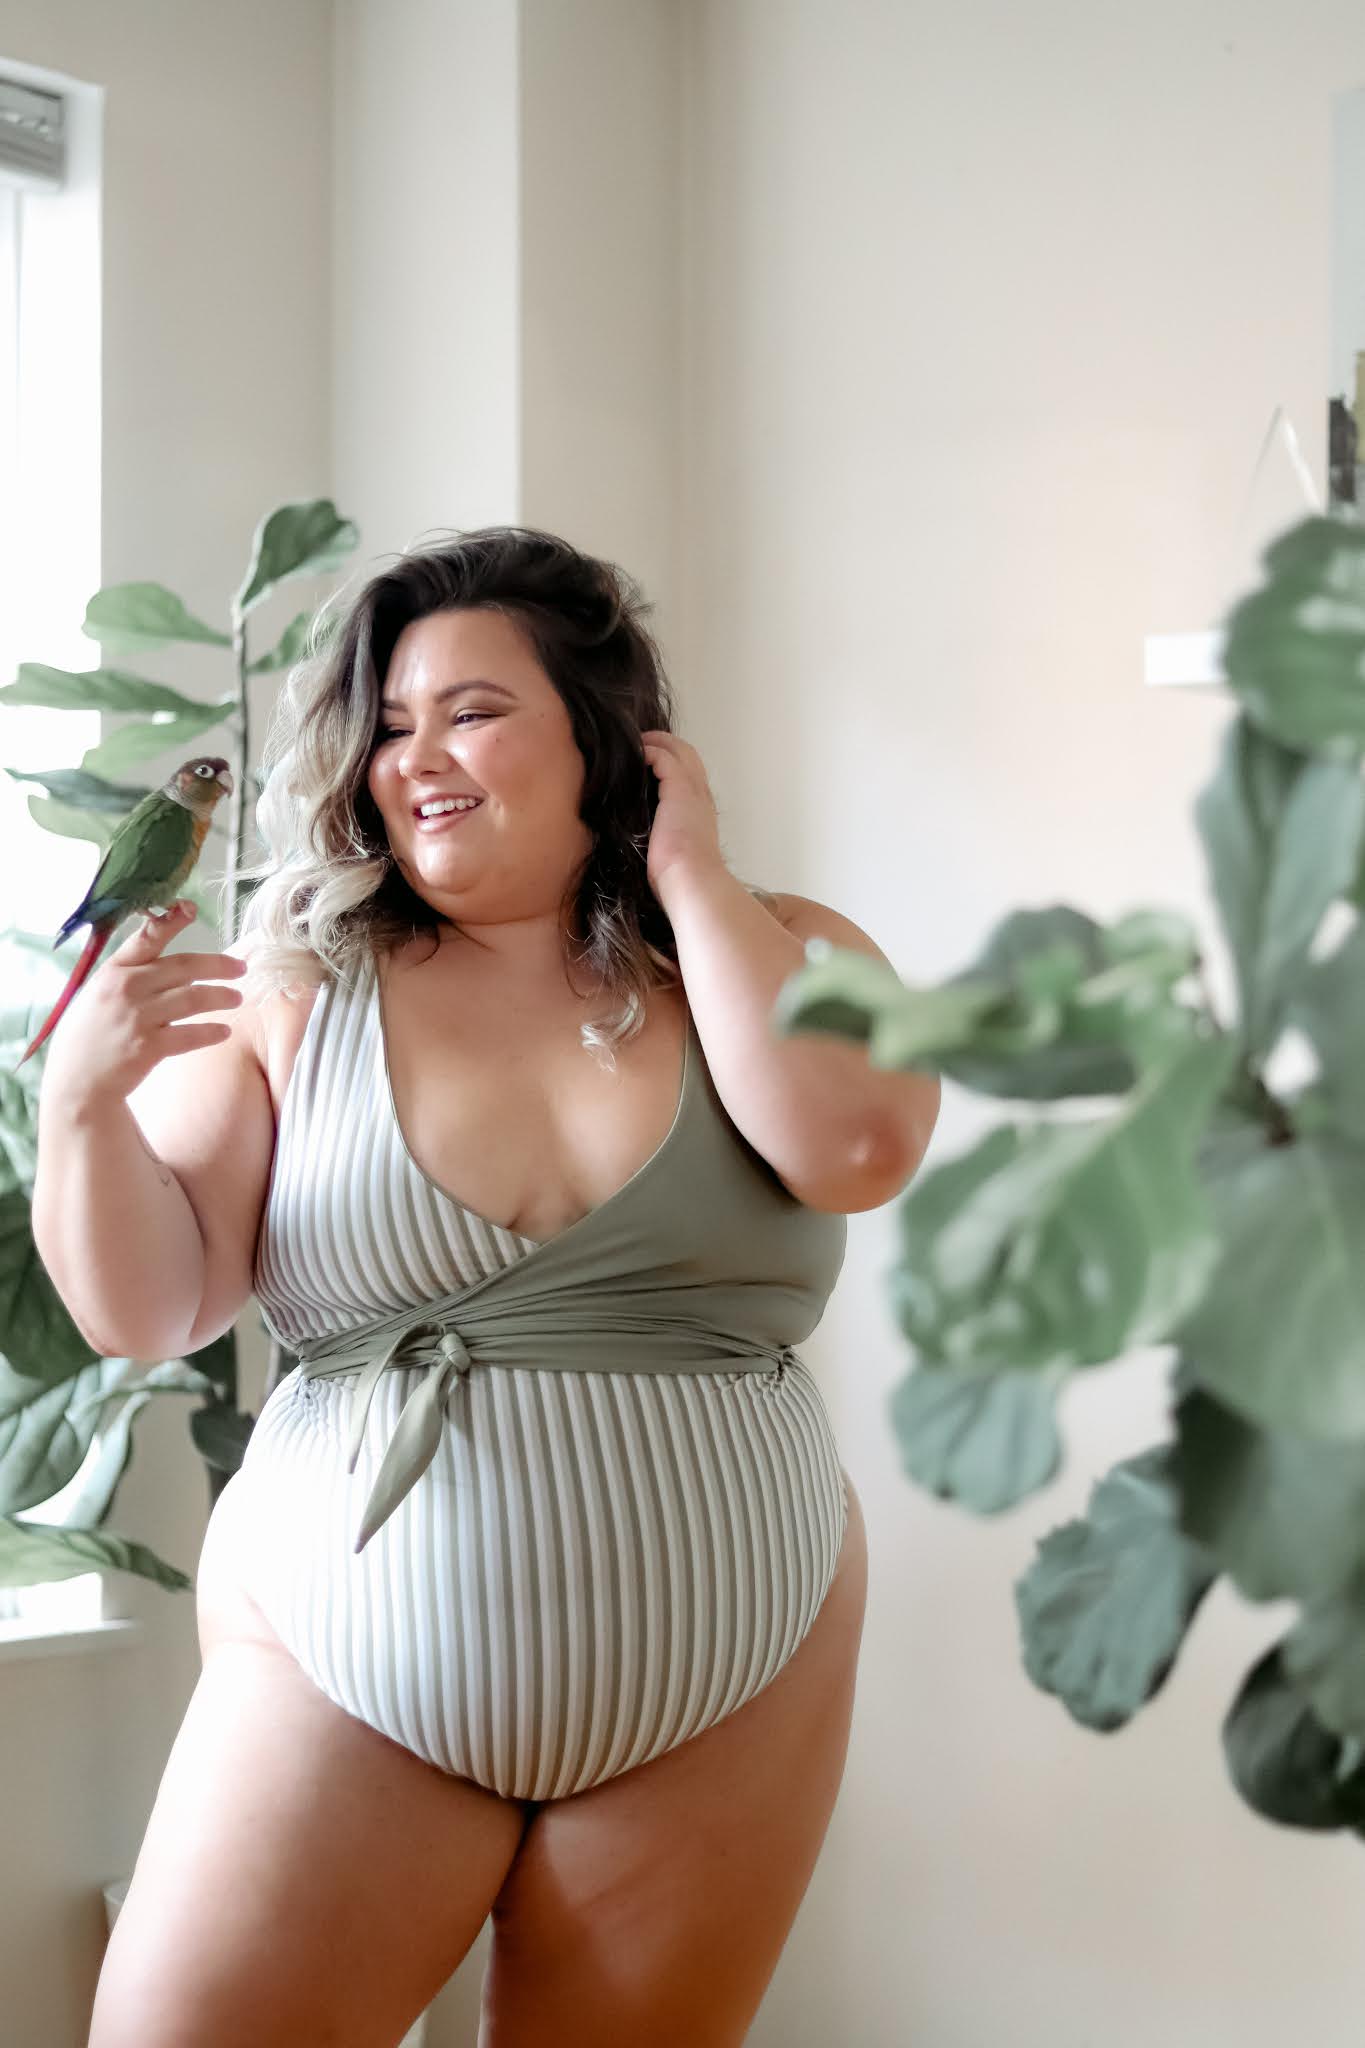 Chicago Plus Size Petite Fashion Blogger Natalie in the City reviews Baiia's sustainable reversible one piece swimsuits